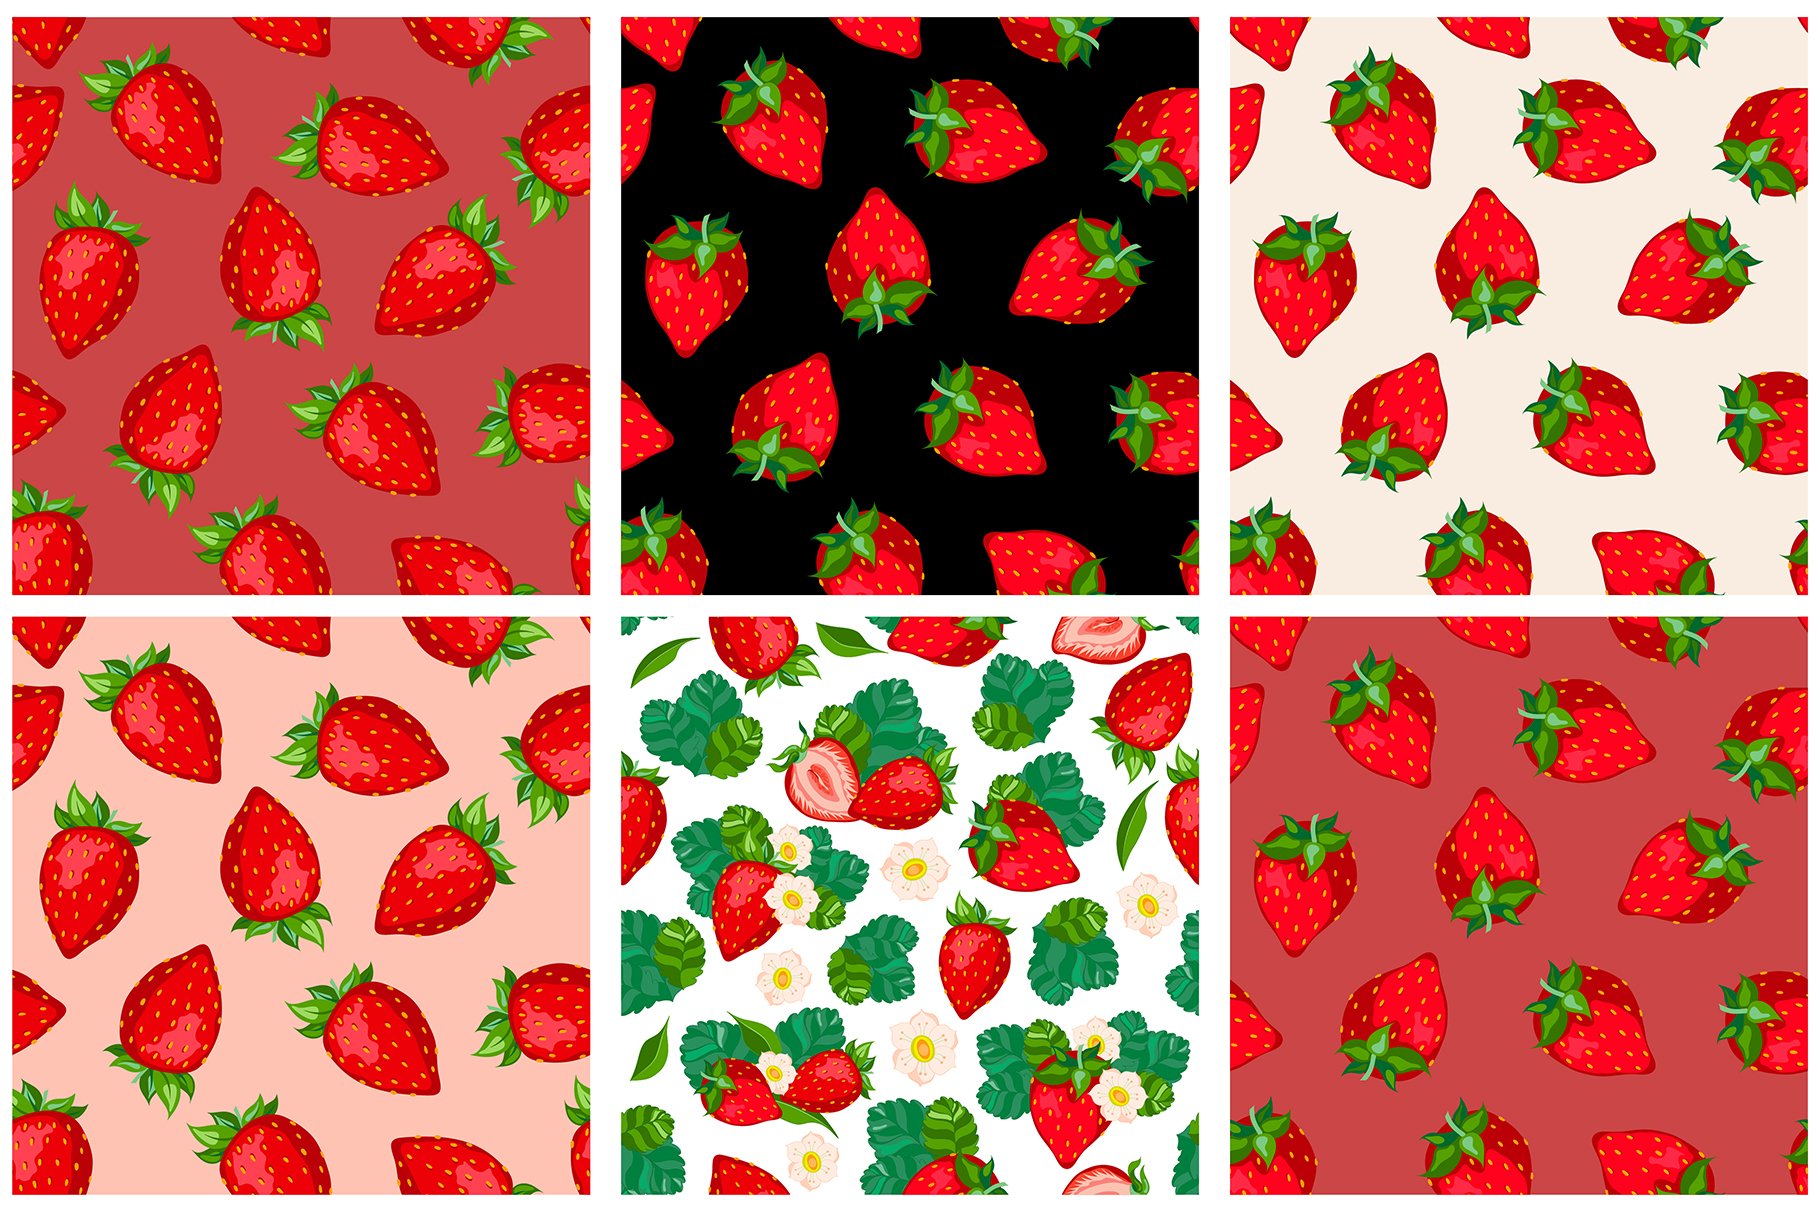 Beautiful 6 different patterns with strawberries and leaves.